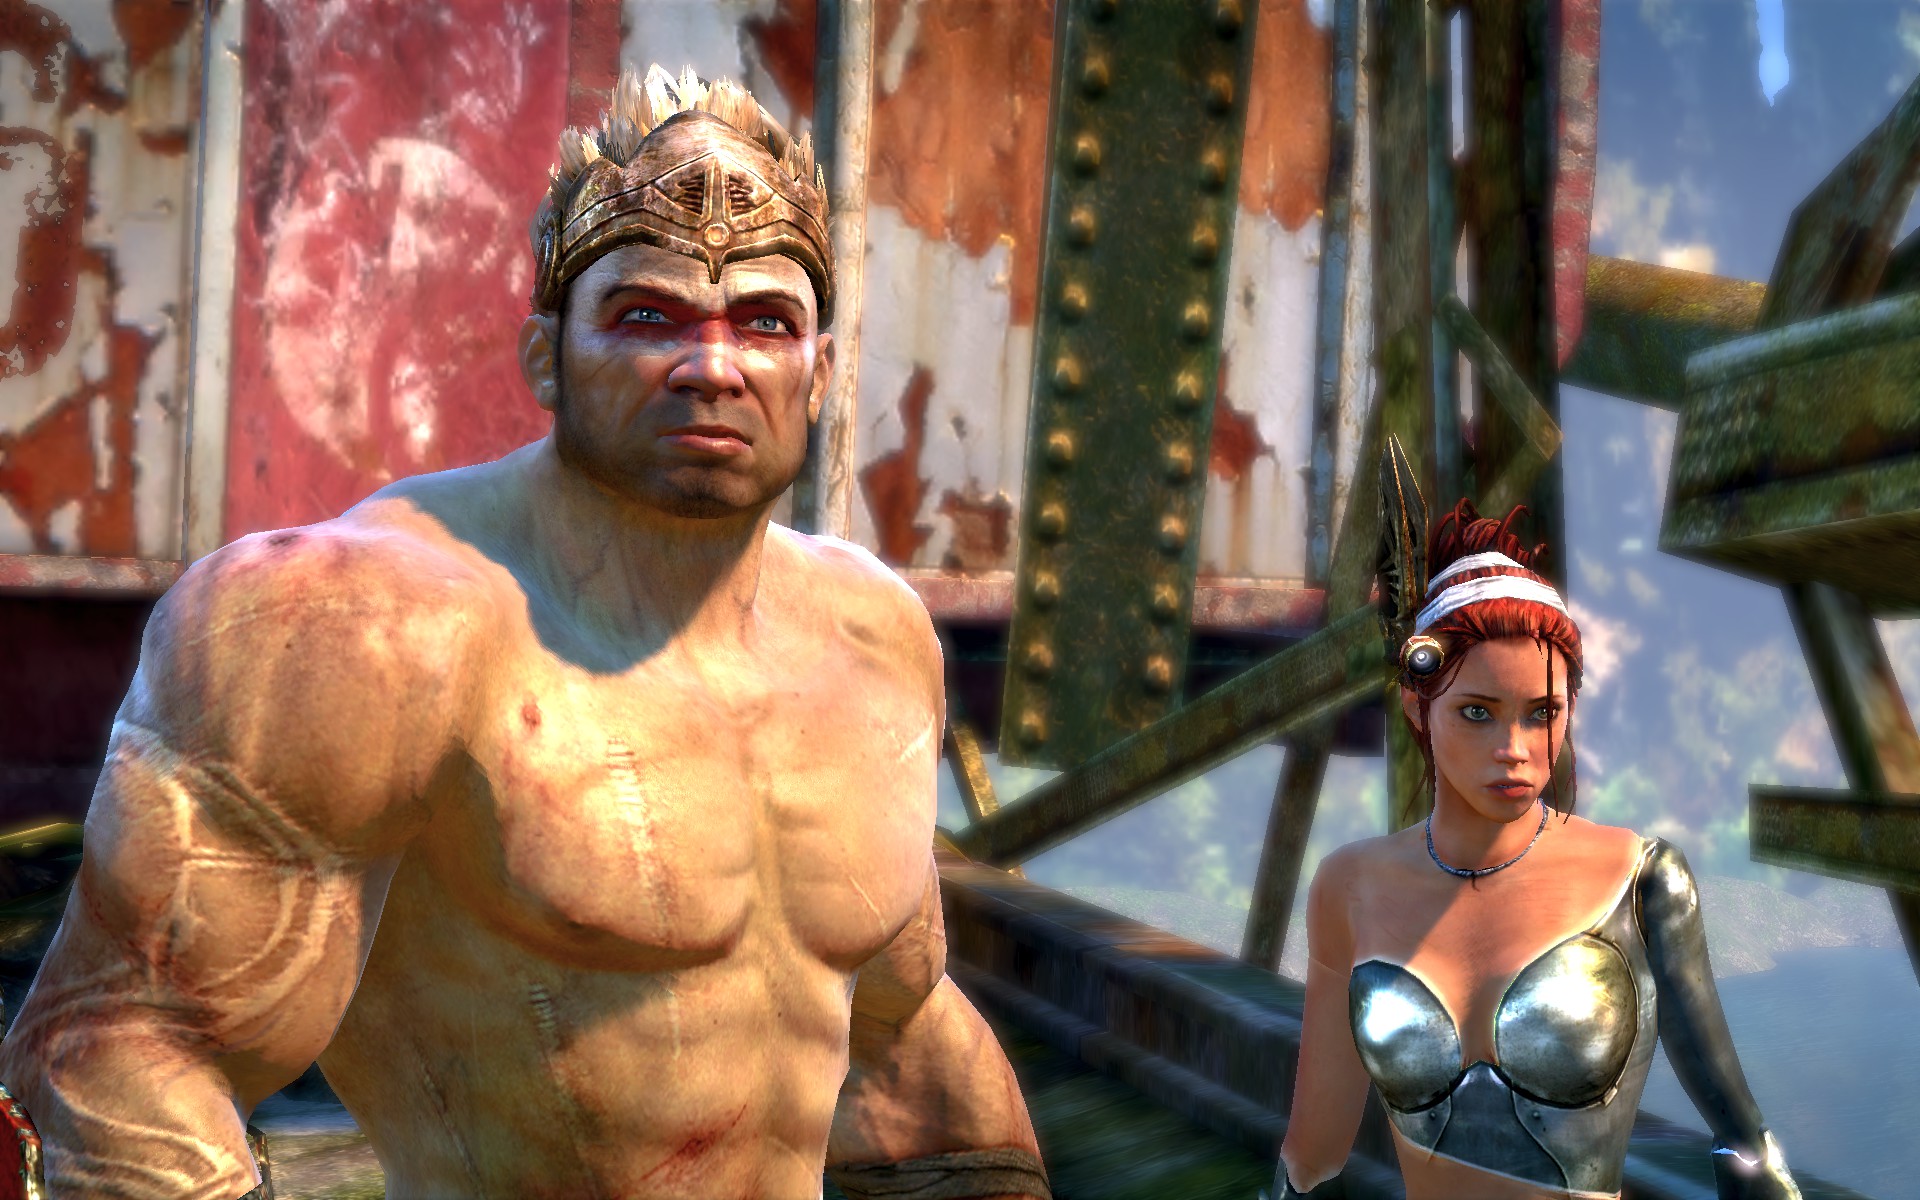 download ps3 enslaved odyssey to the west